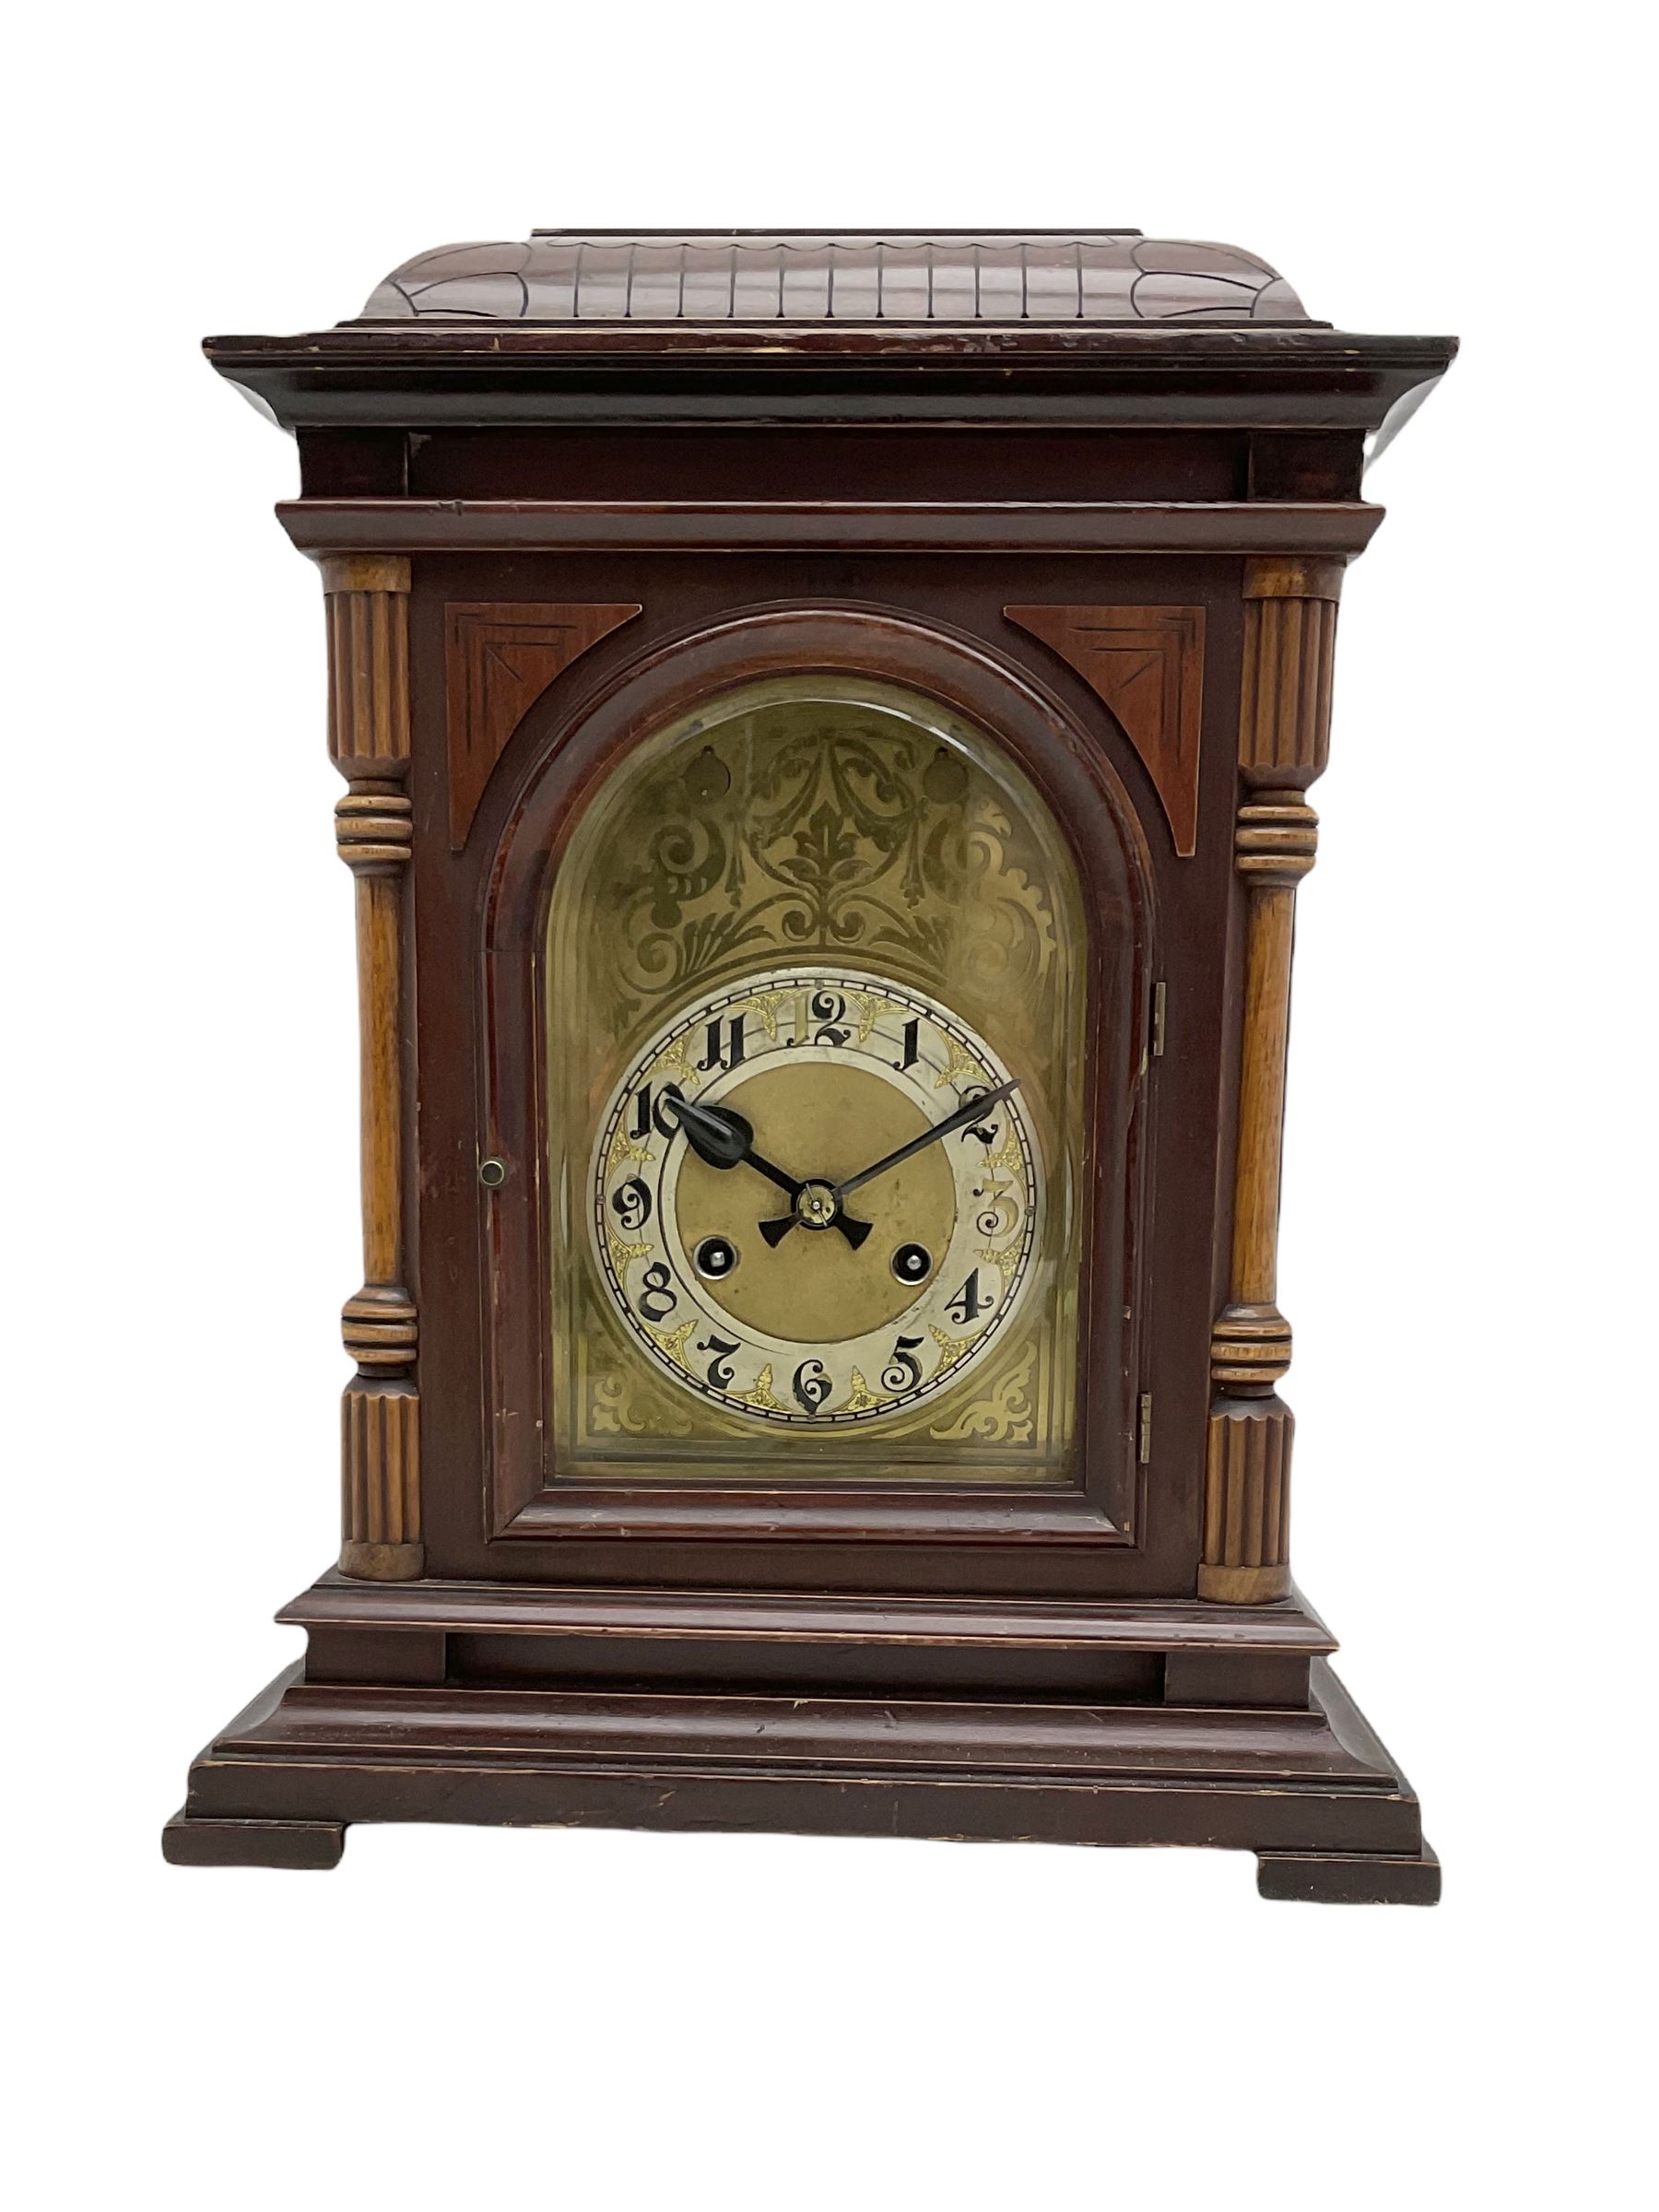 A Junghans two train mantle clock with a subsidiary third chiming train